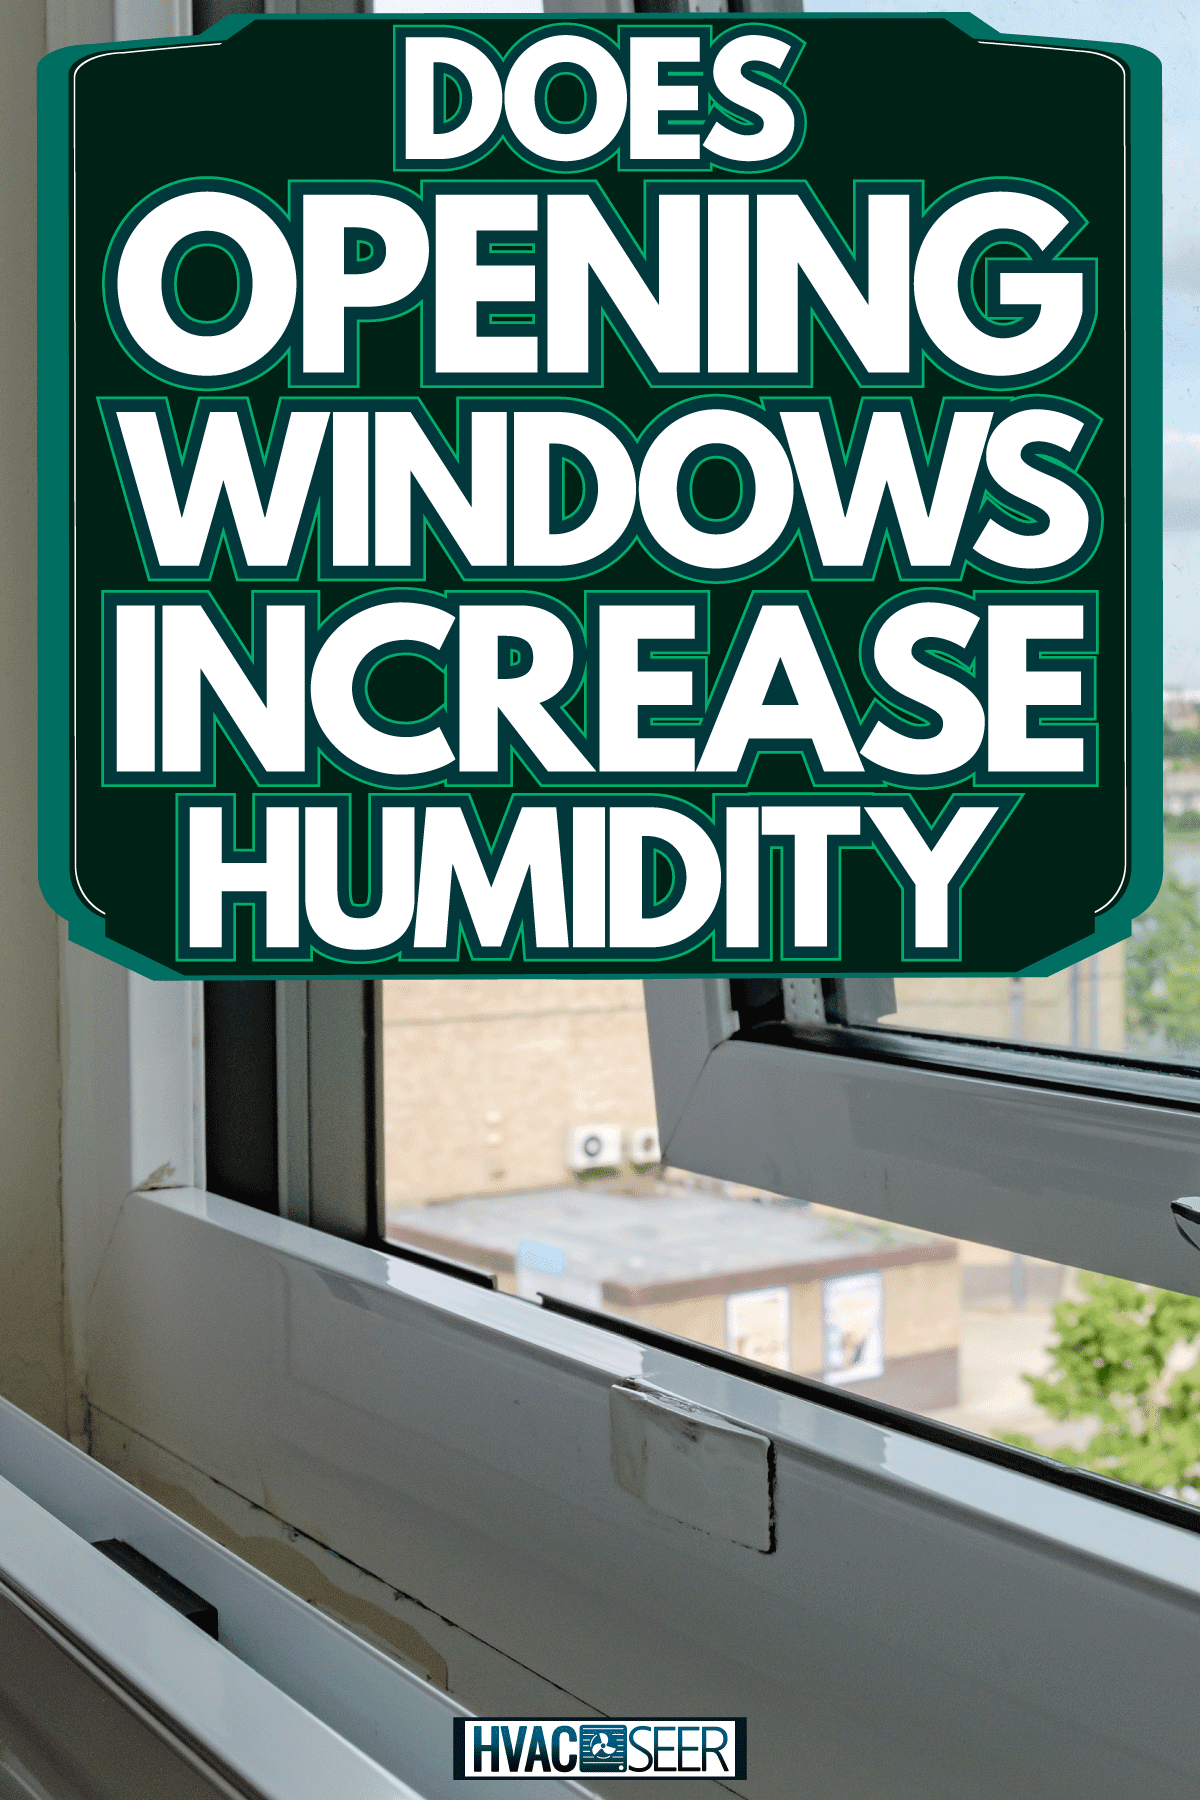 A window left open due to humid levels inside the room, Does Opening Windows Increase Humidity